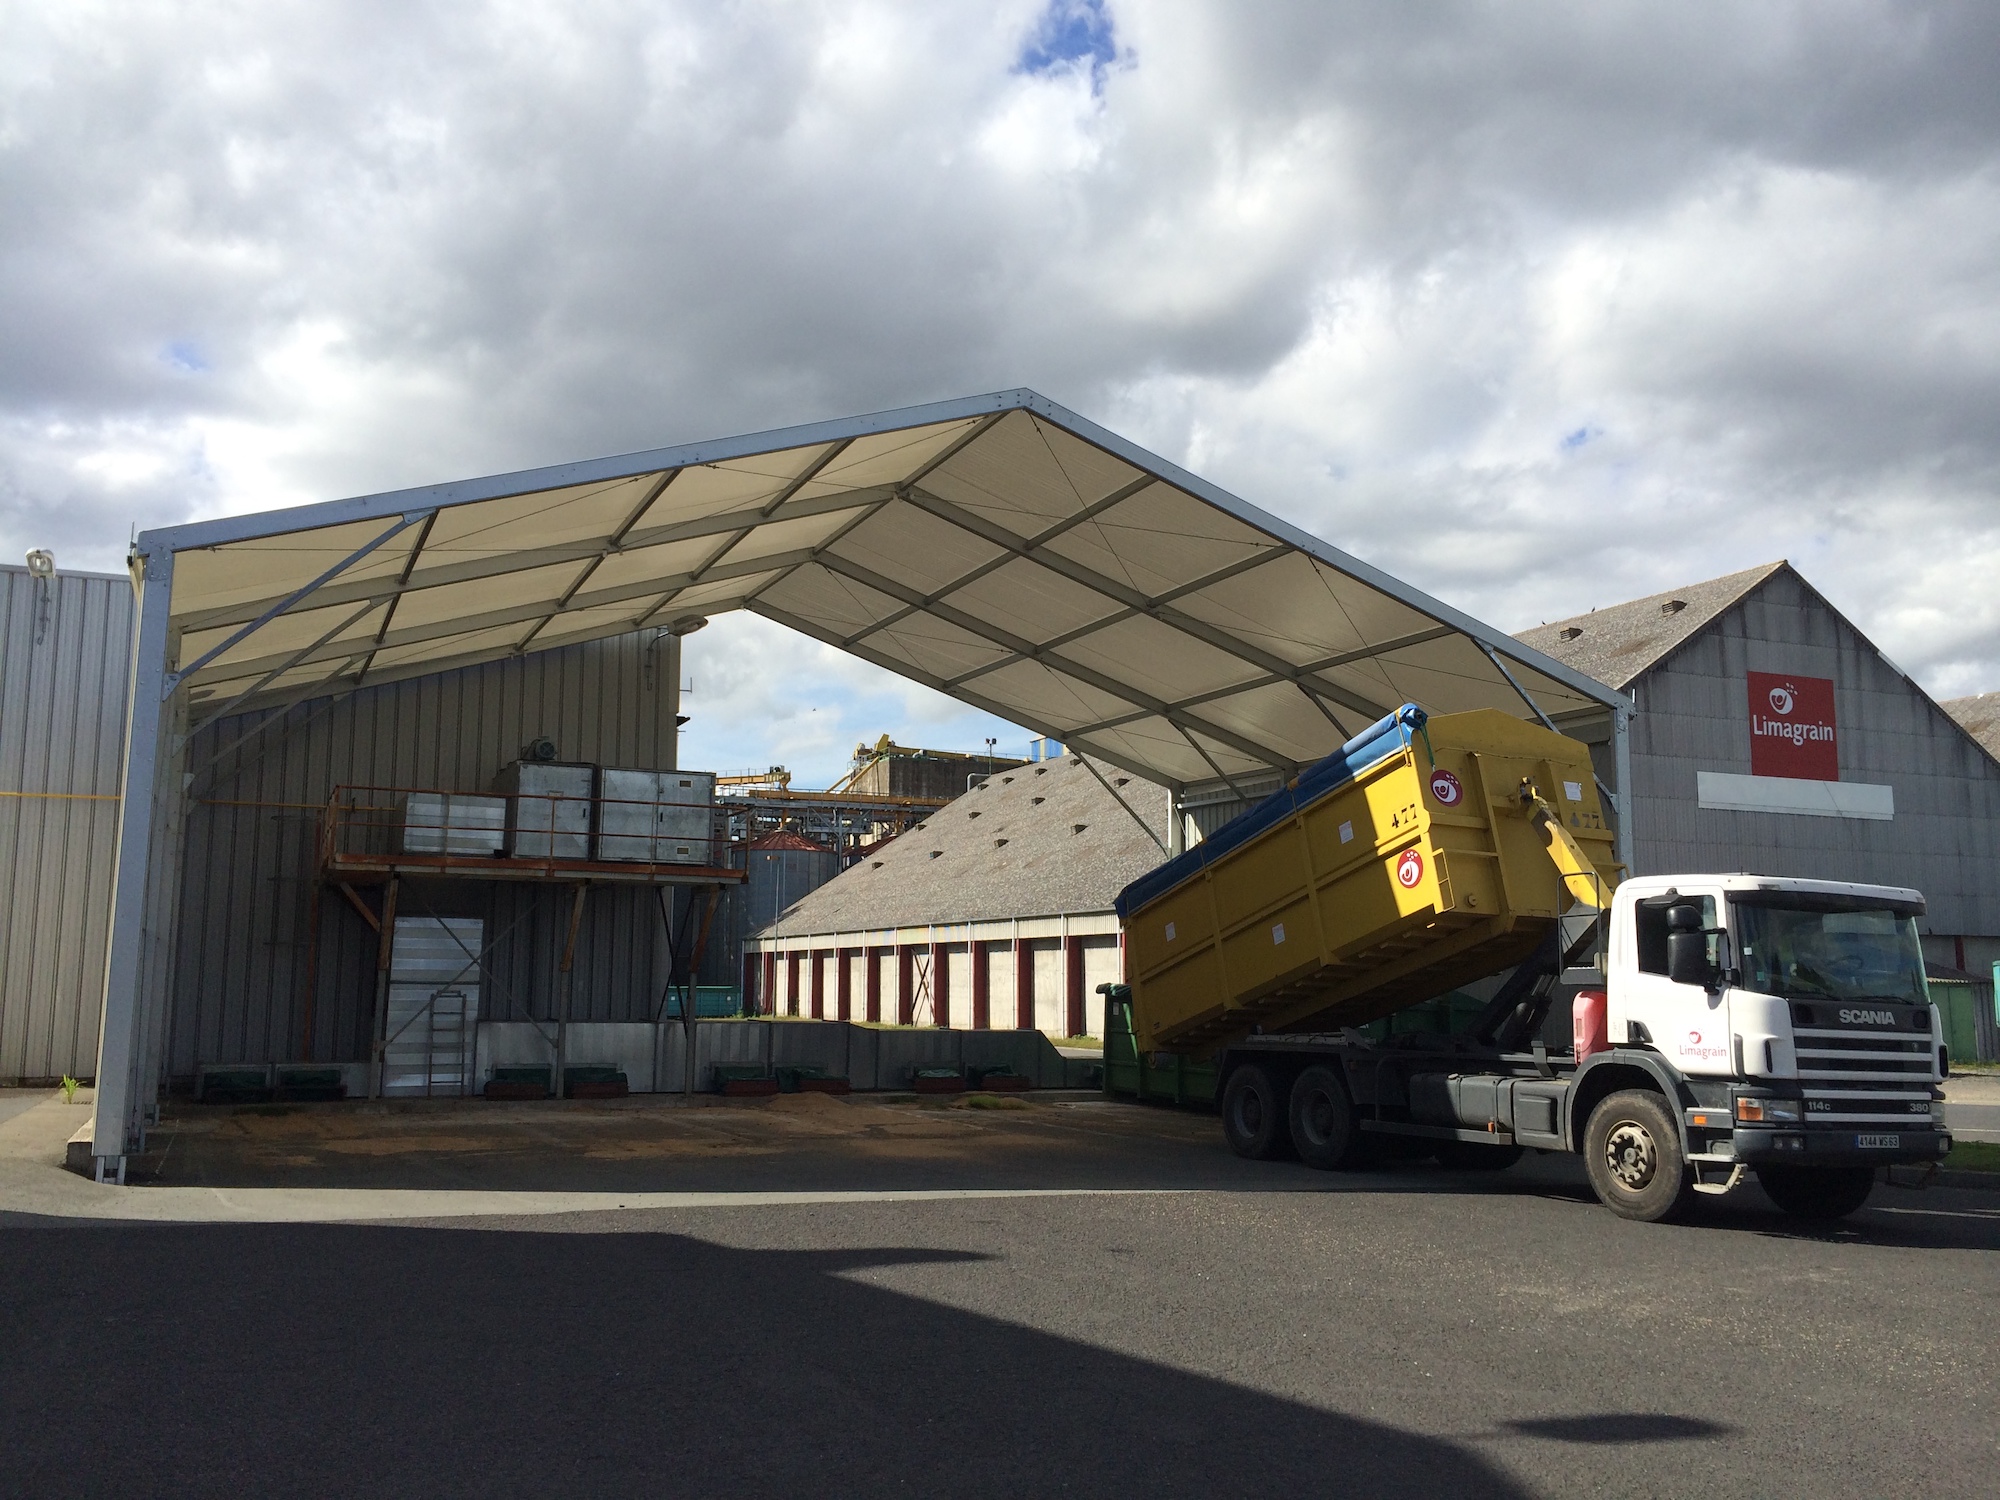 Lauralu temporary building structures and demountable buildings for waste & recycling